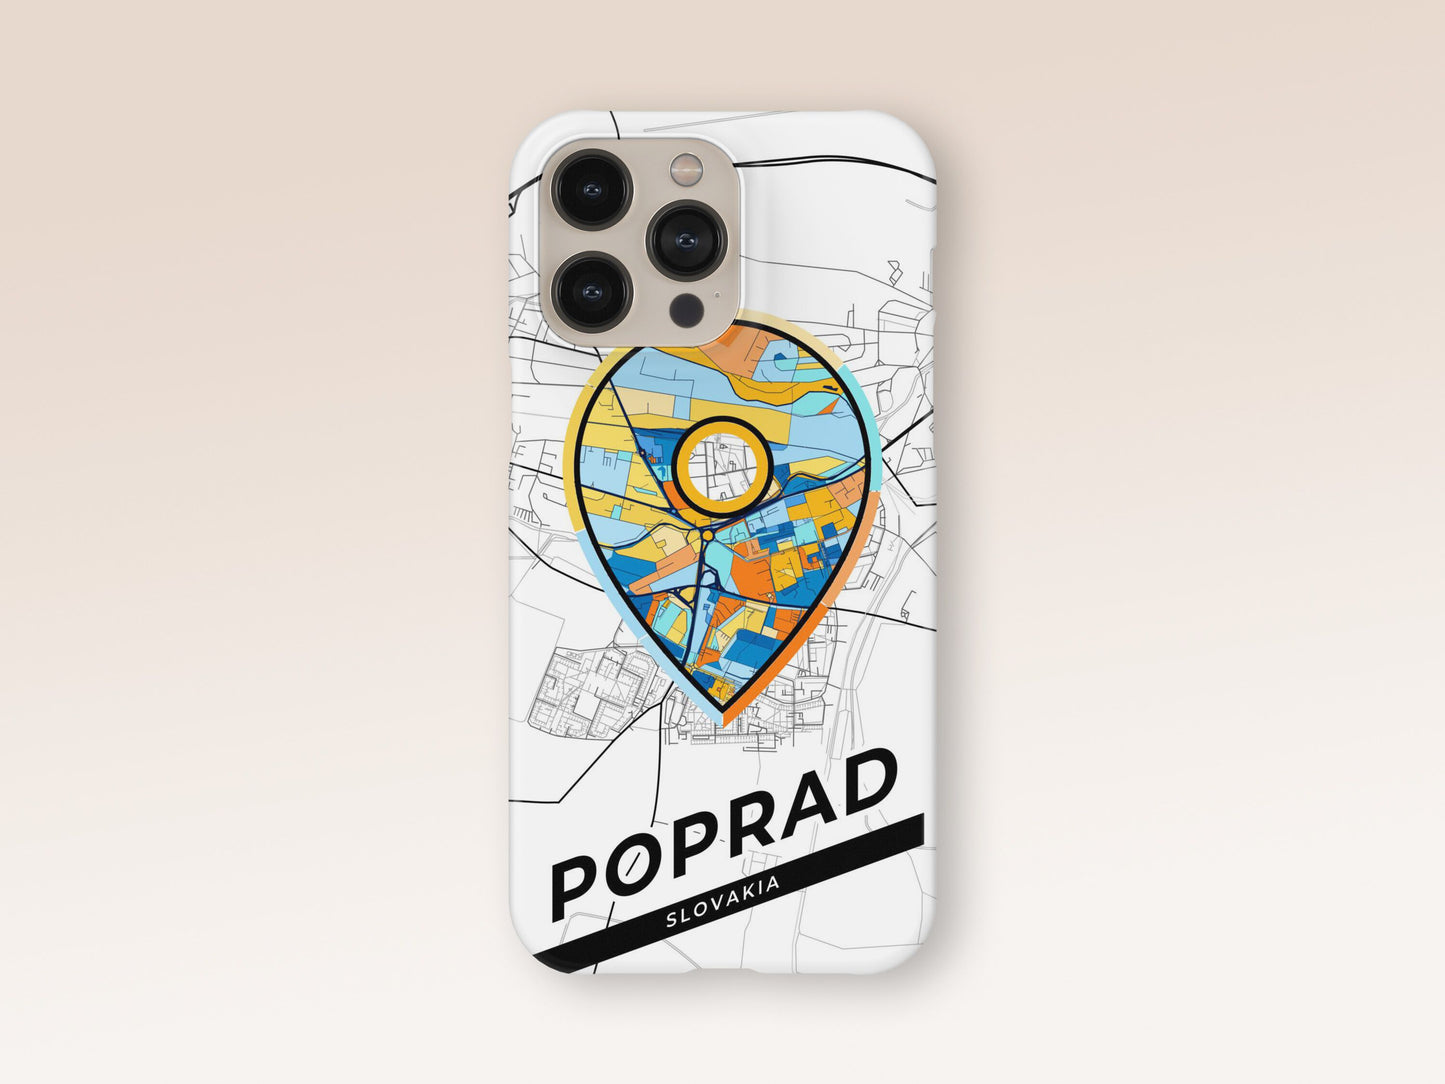 Poprad Slovakia slim phone case with colorful icon. Birthday, wedding or housewarming gift. Couple match cases. 1